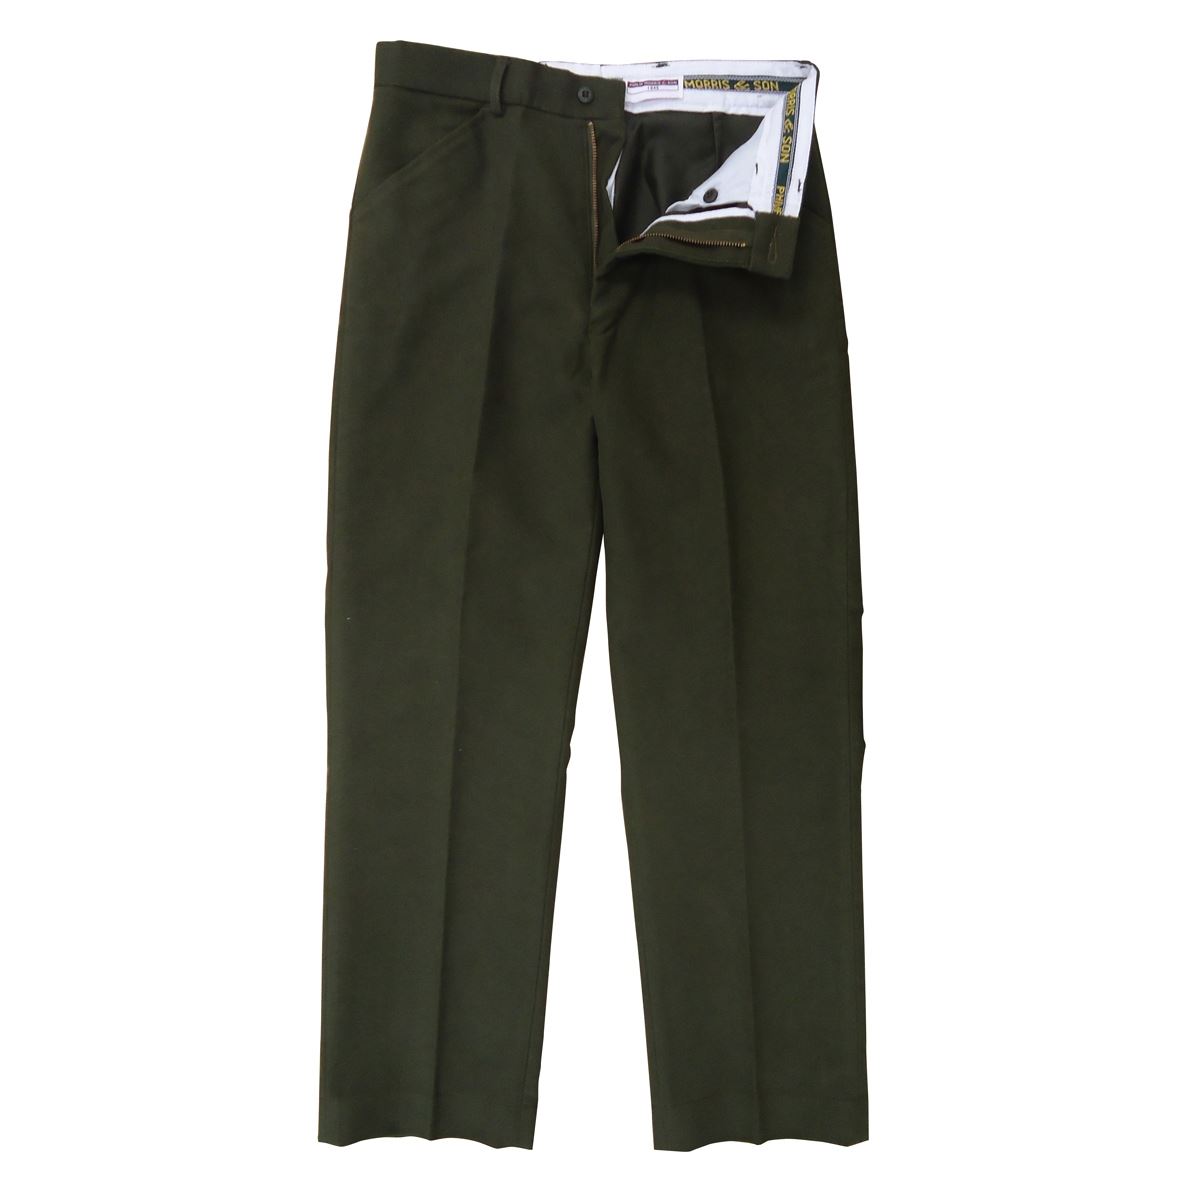 What are the features of the mens moleskin trousers by Philip Morris & Son?